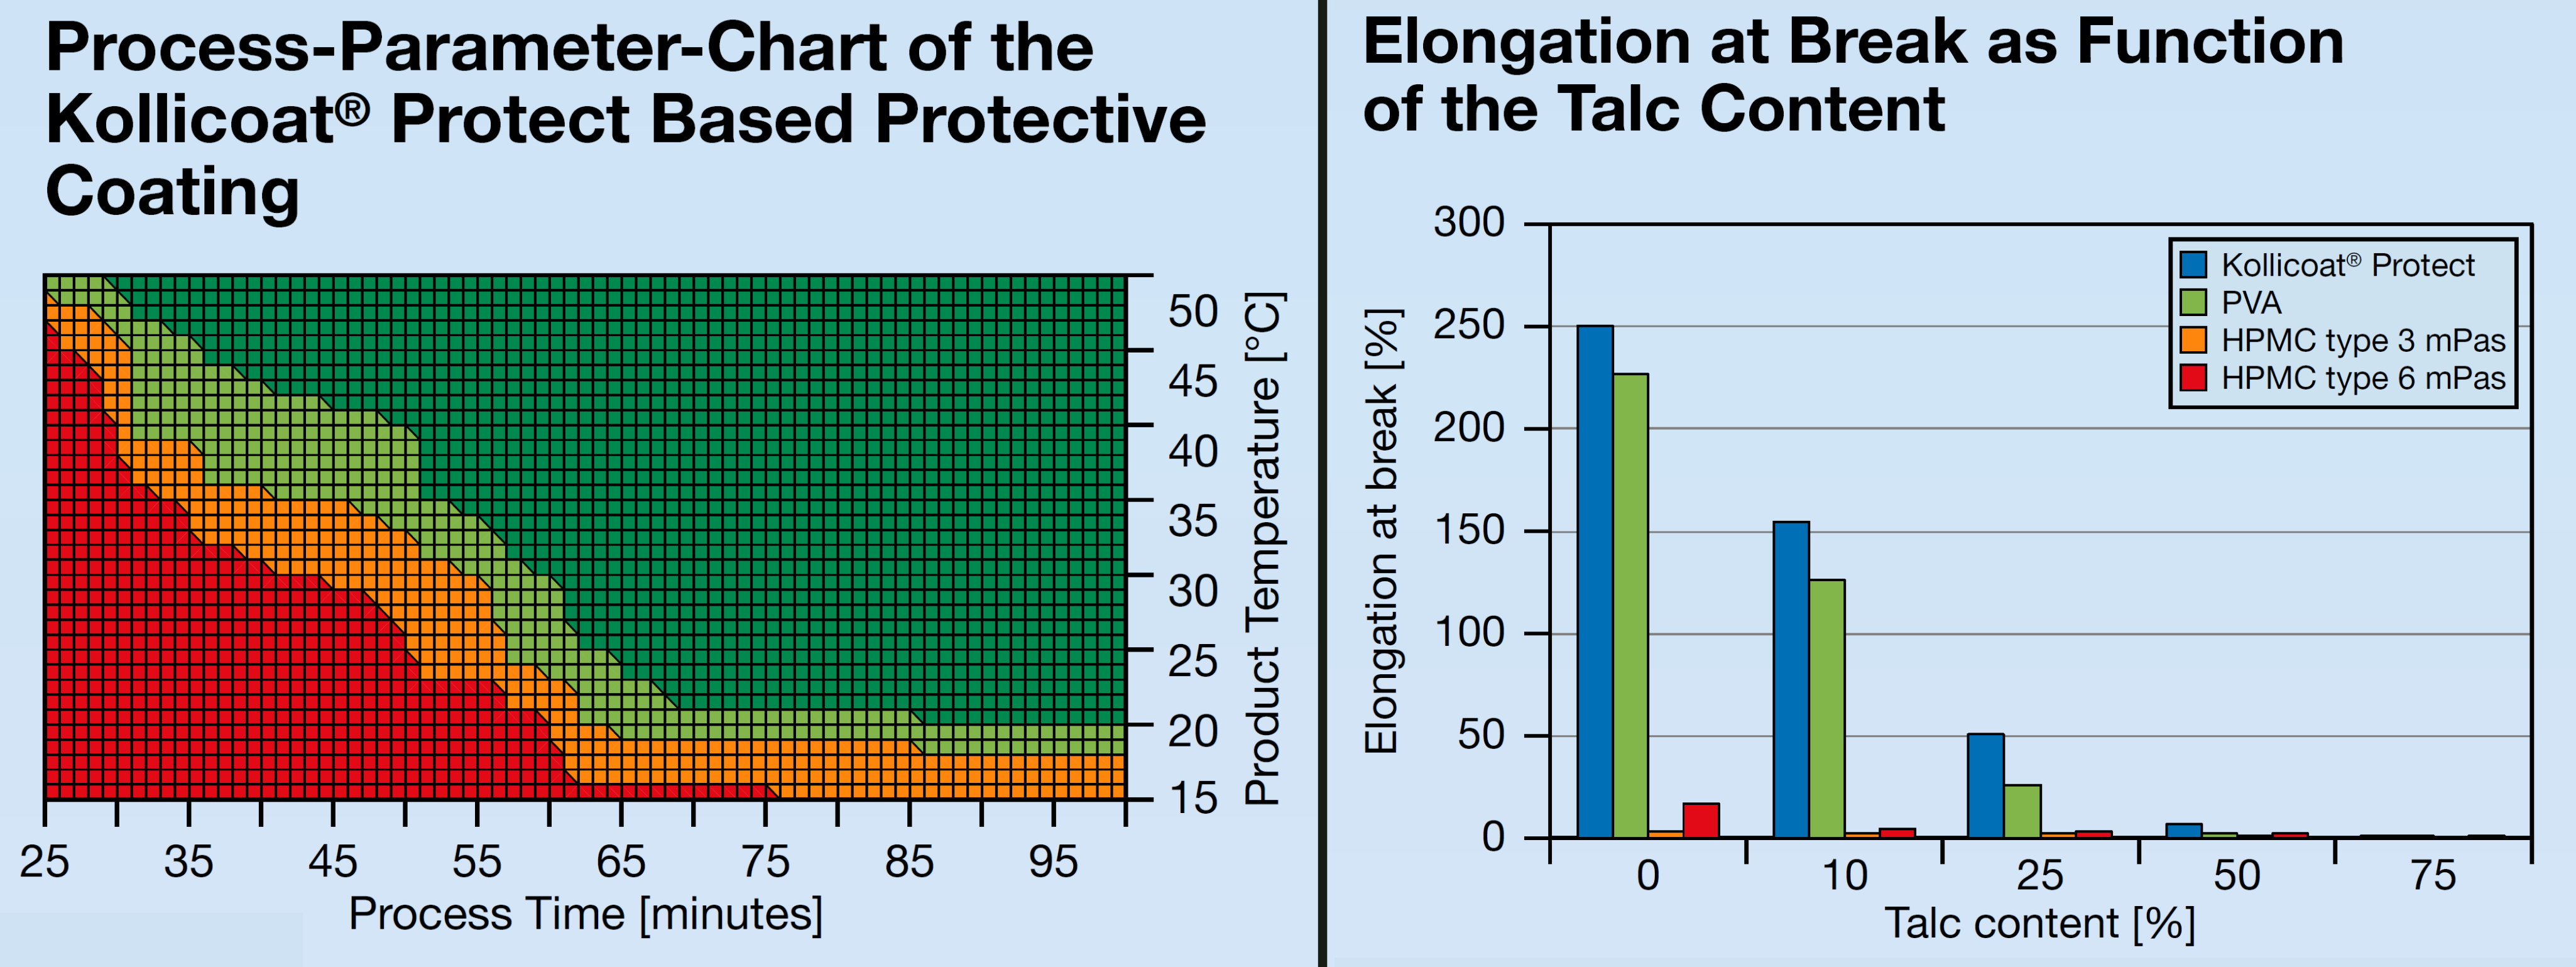 graph Elongation at Break as Function of the Talc Content and Process-Parameter-Chart of the Kollicoat® Protect Based Protective Coating